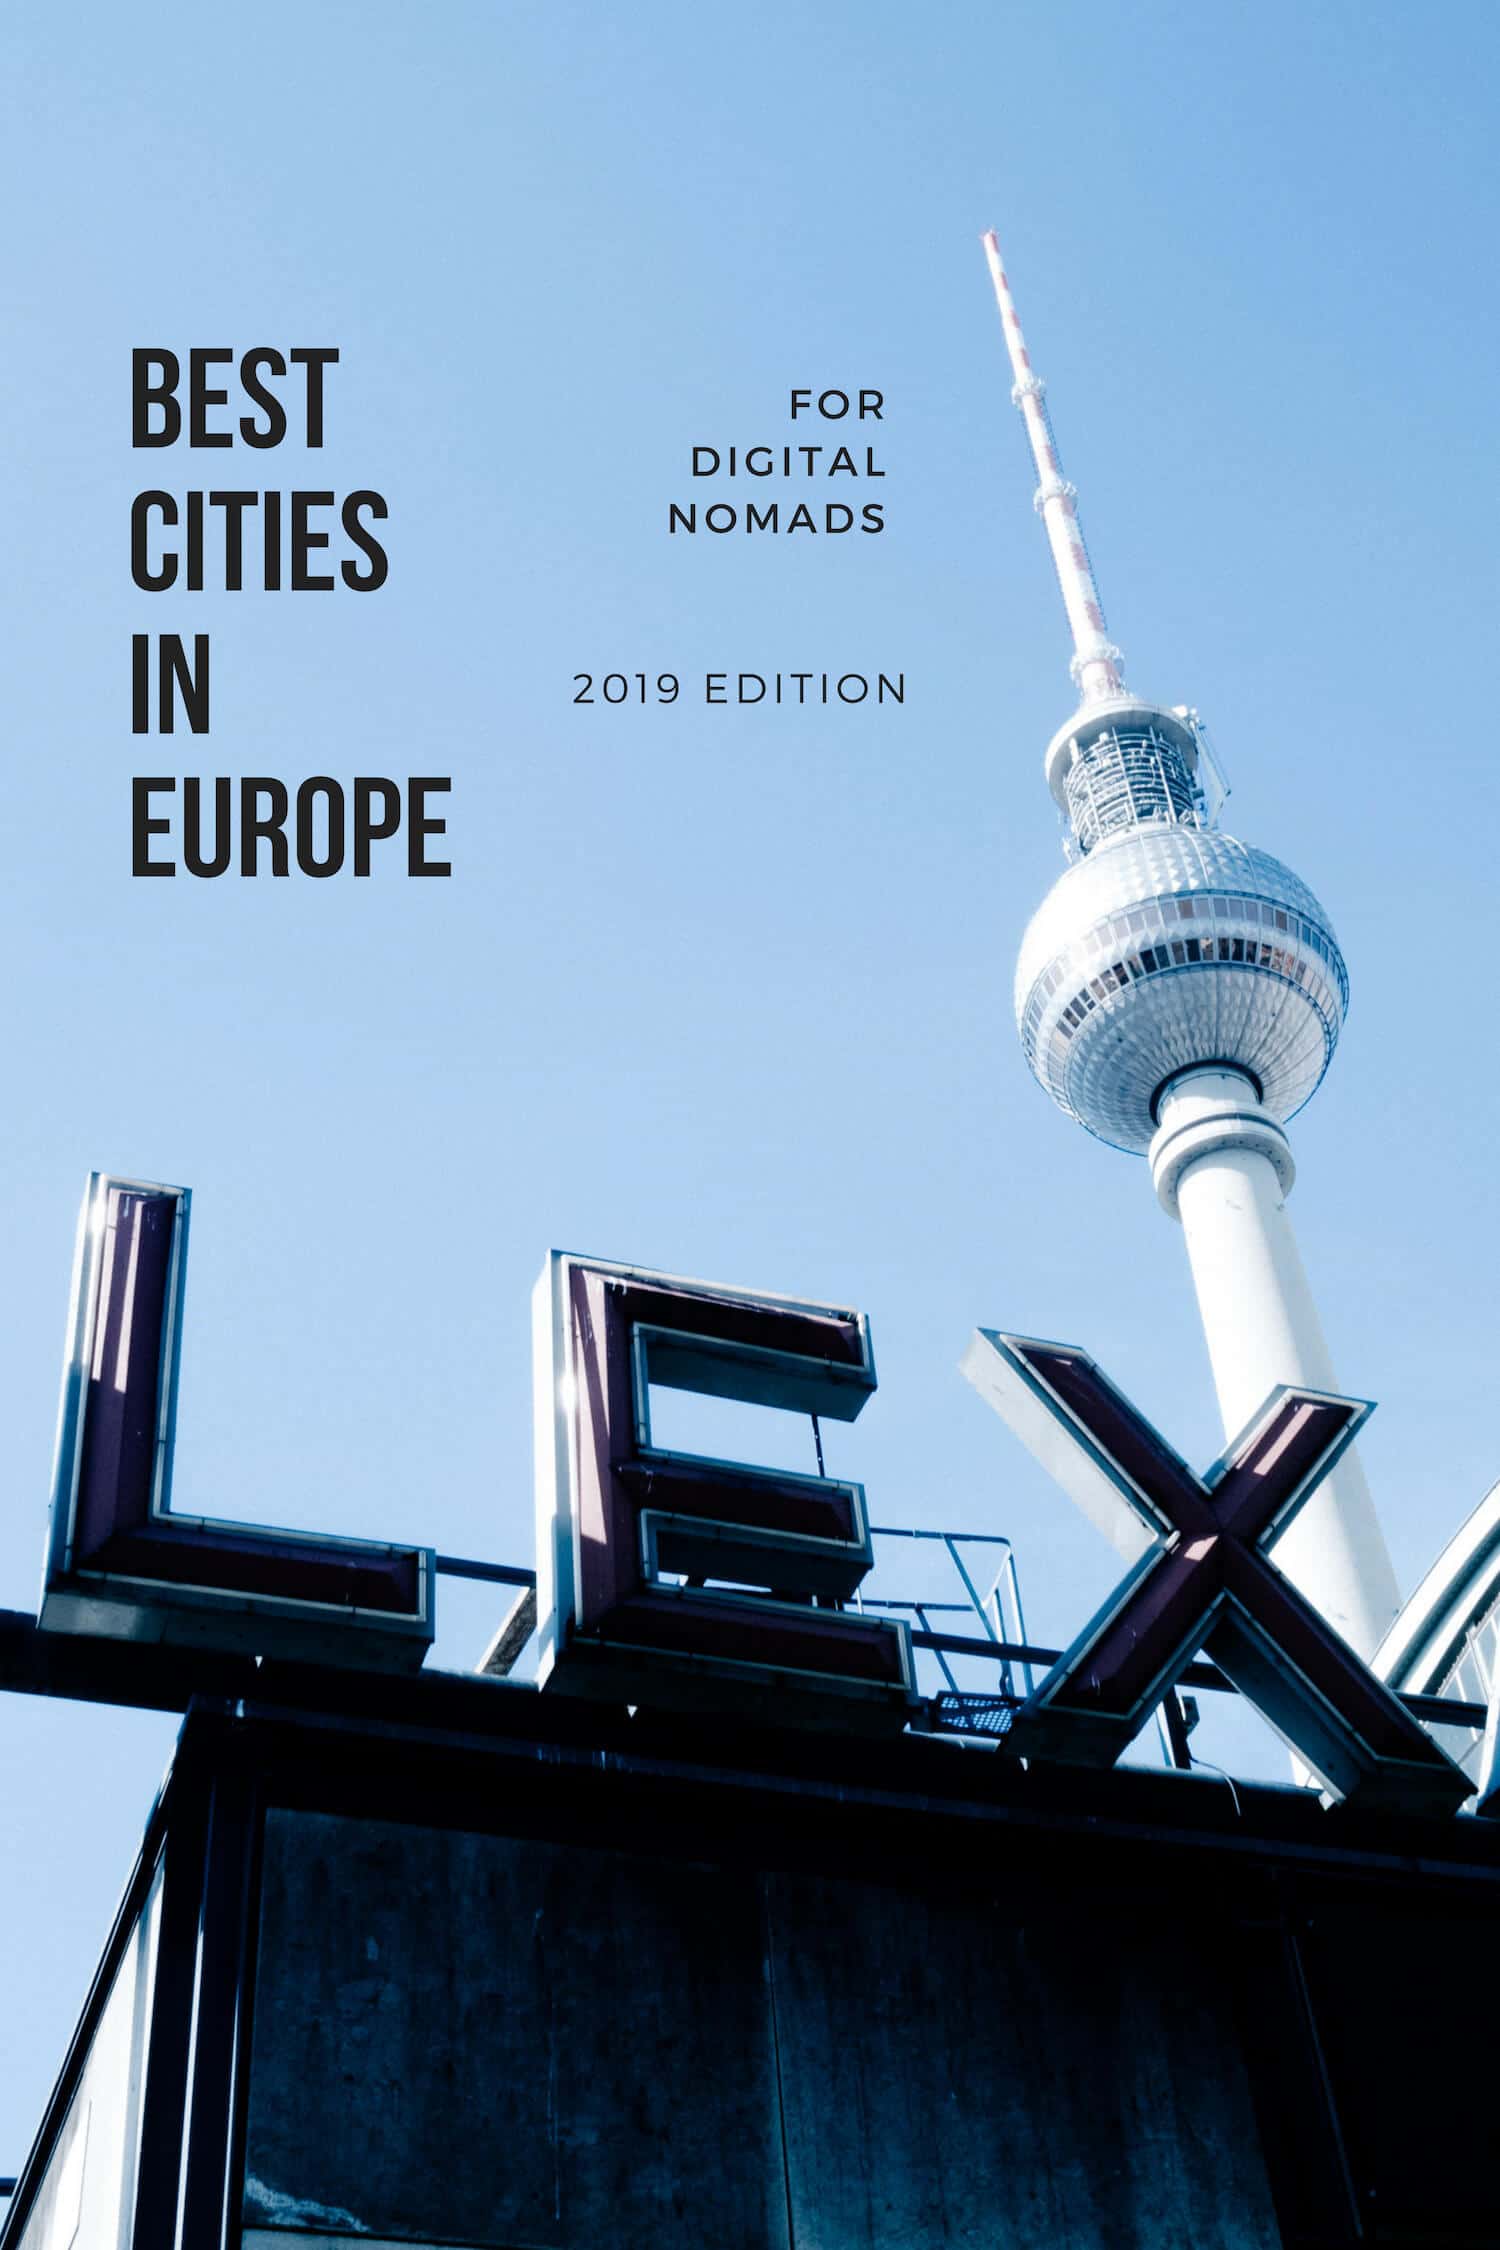 Best Cities in Europe for Digital Nomads